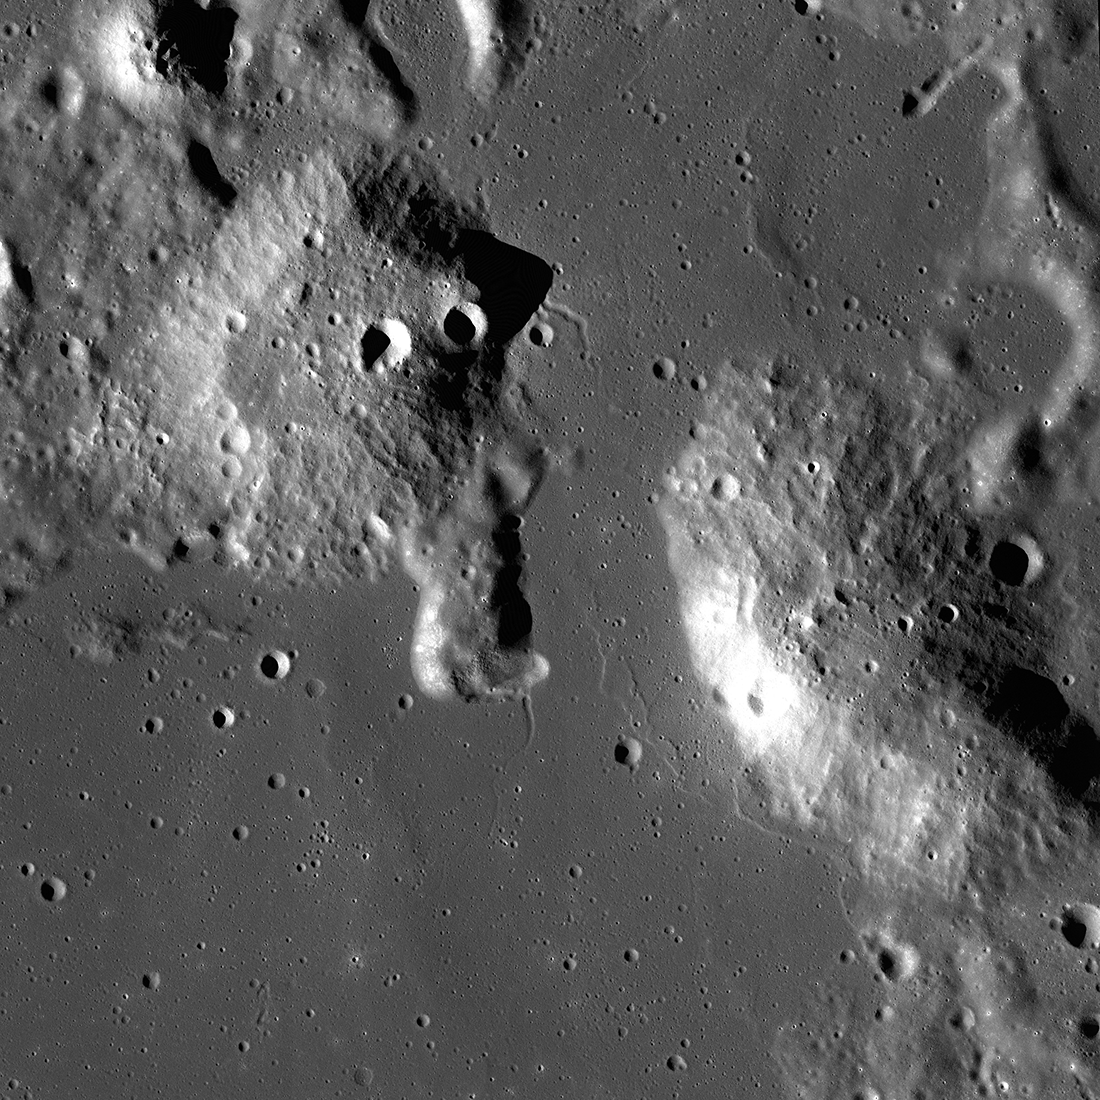 This is an image of the Gruithuisen Domes, taken by the Lunar Reconnaissance Orbiter (LRO). The Domes protrude from the surrounding lunar terrain and are pockmarked with craters.